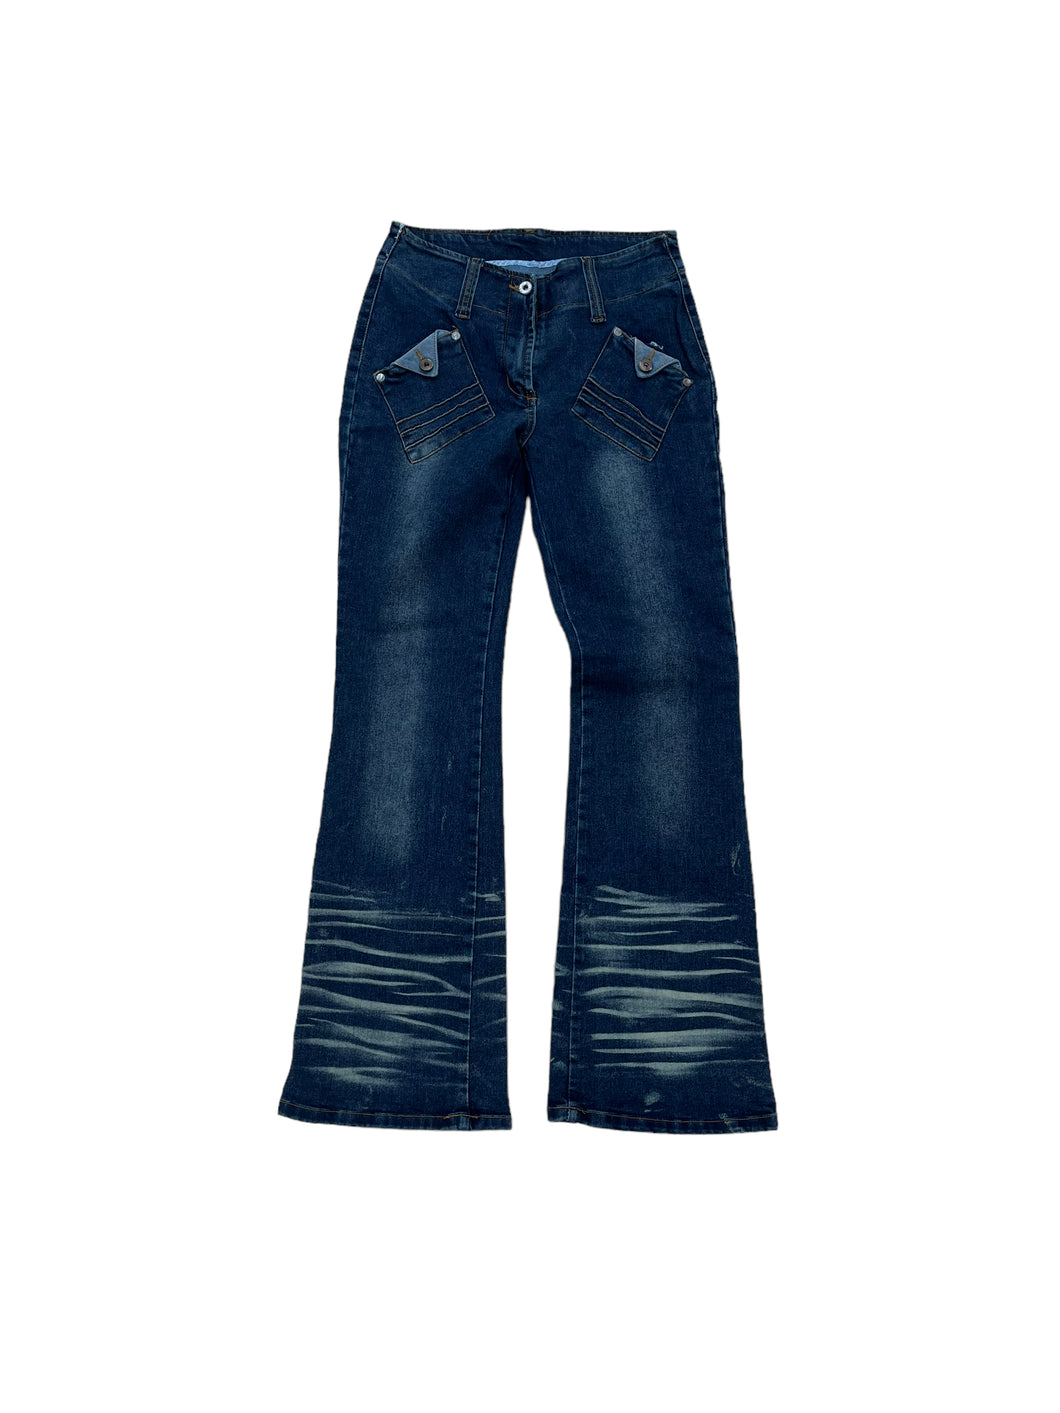 True Y2K flare denim pants with special details